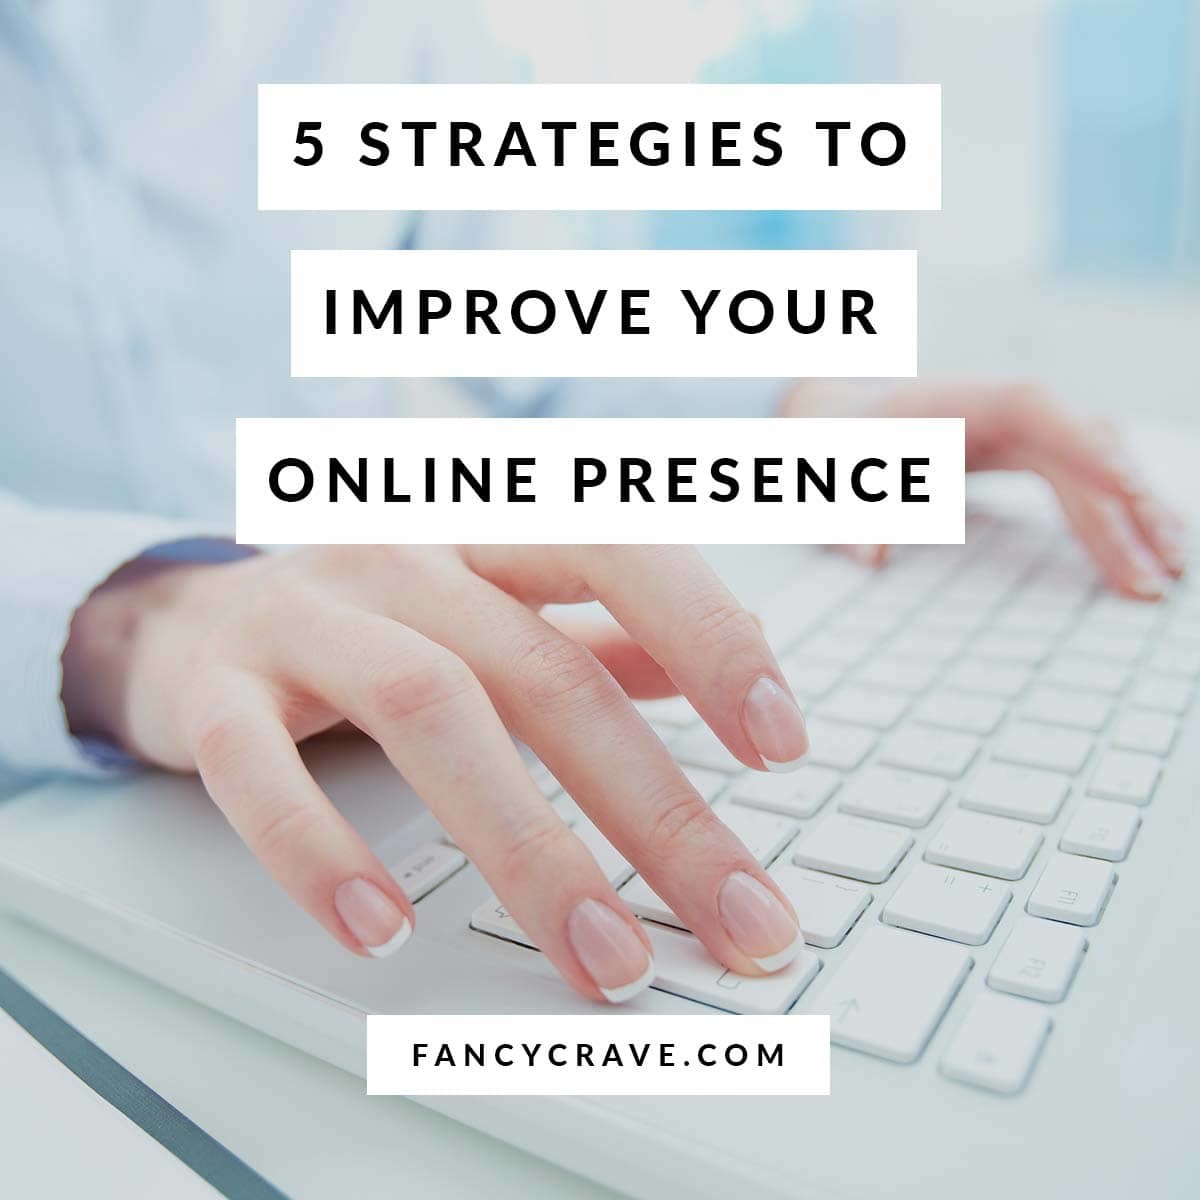 5 Strategies to Improve Your Online Presence | Fancycrave